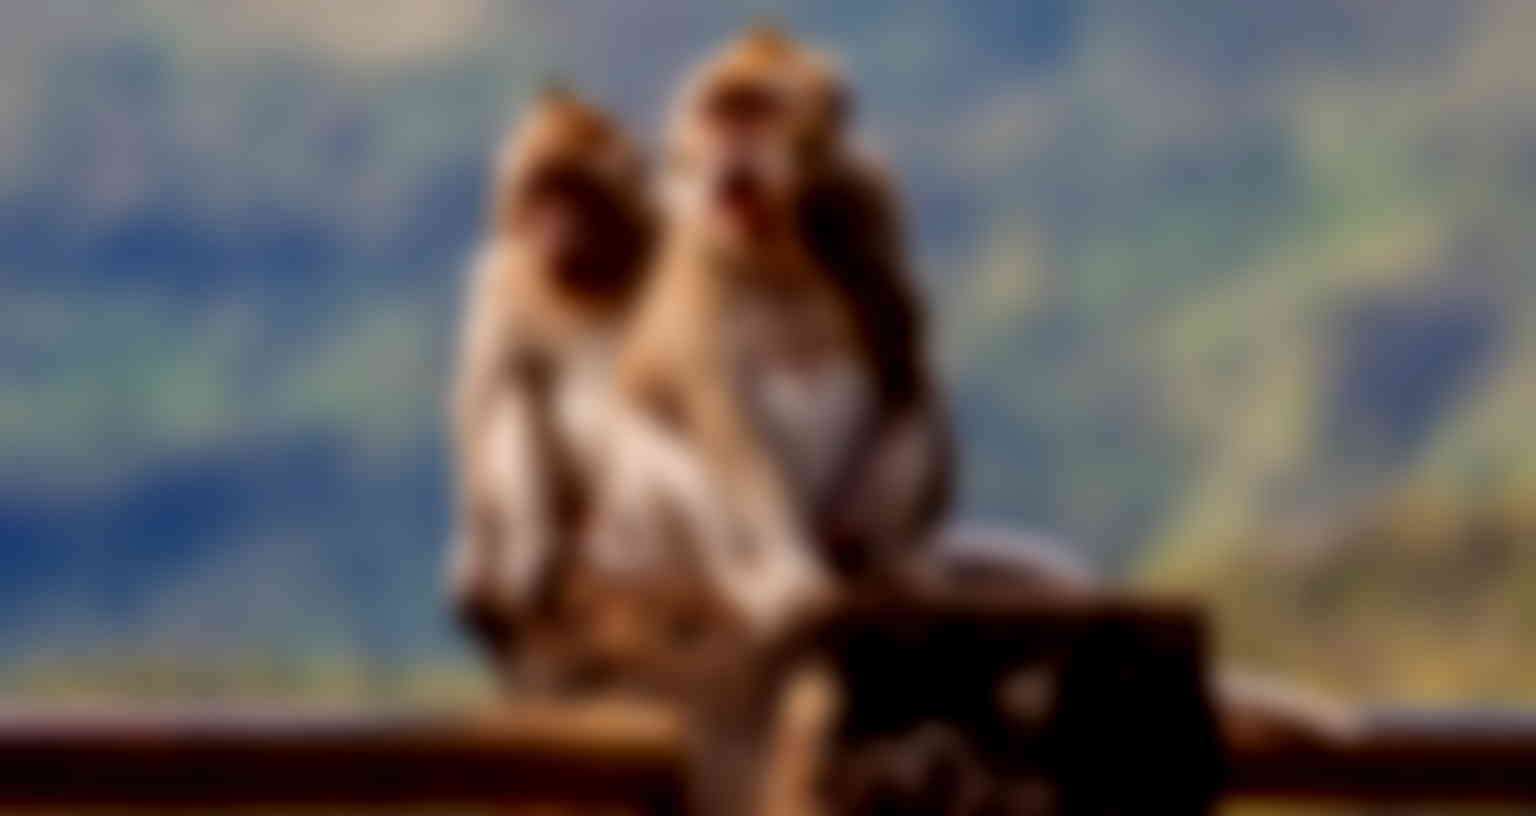 Indonesian monkeys use stones as sex toys, researchers find